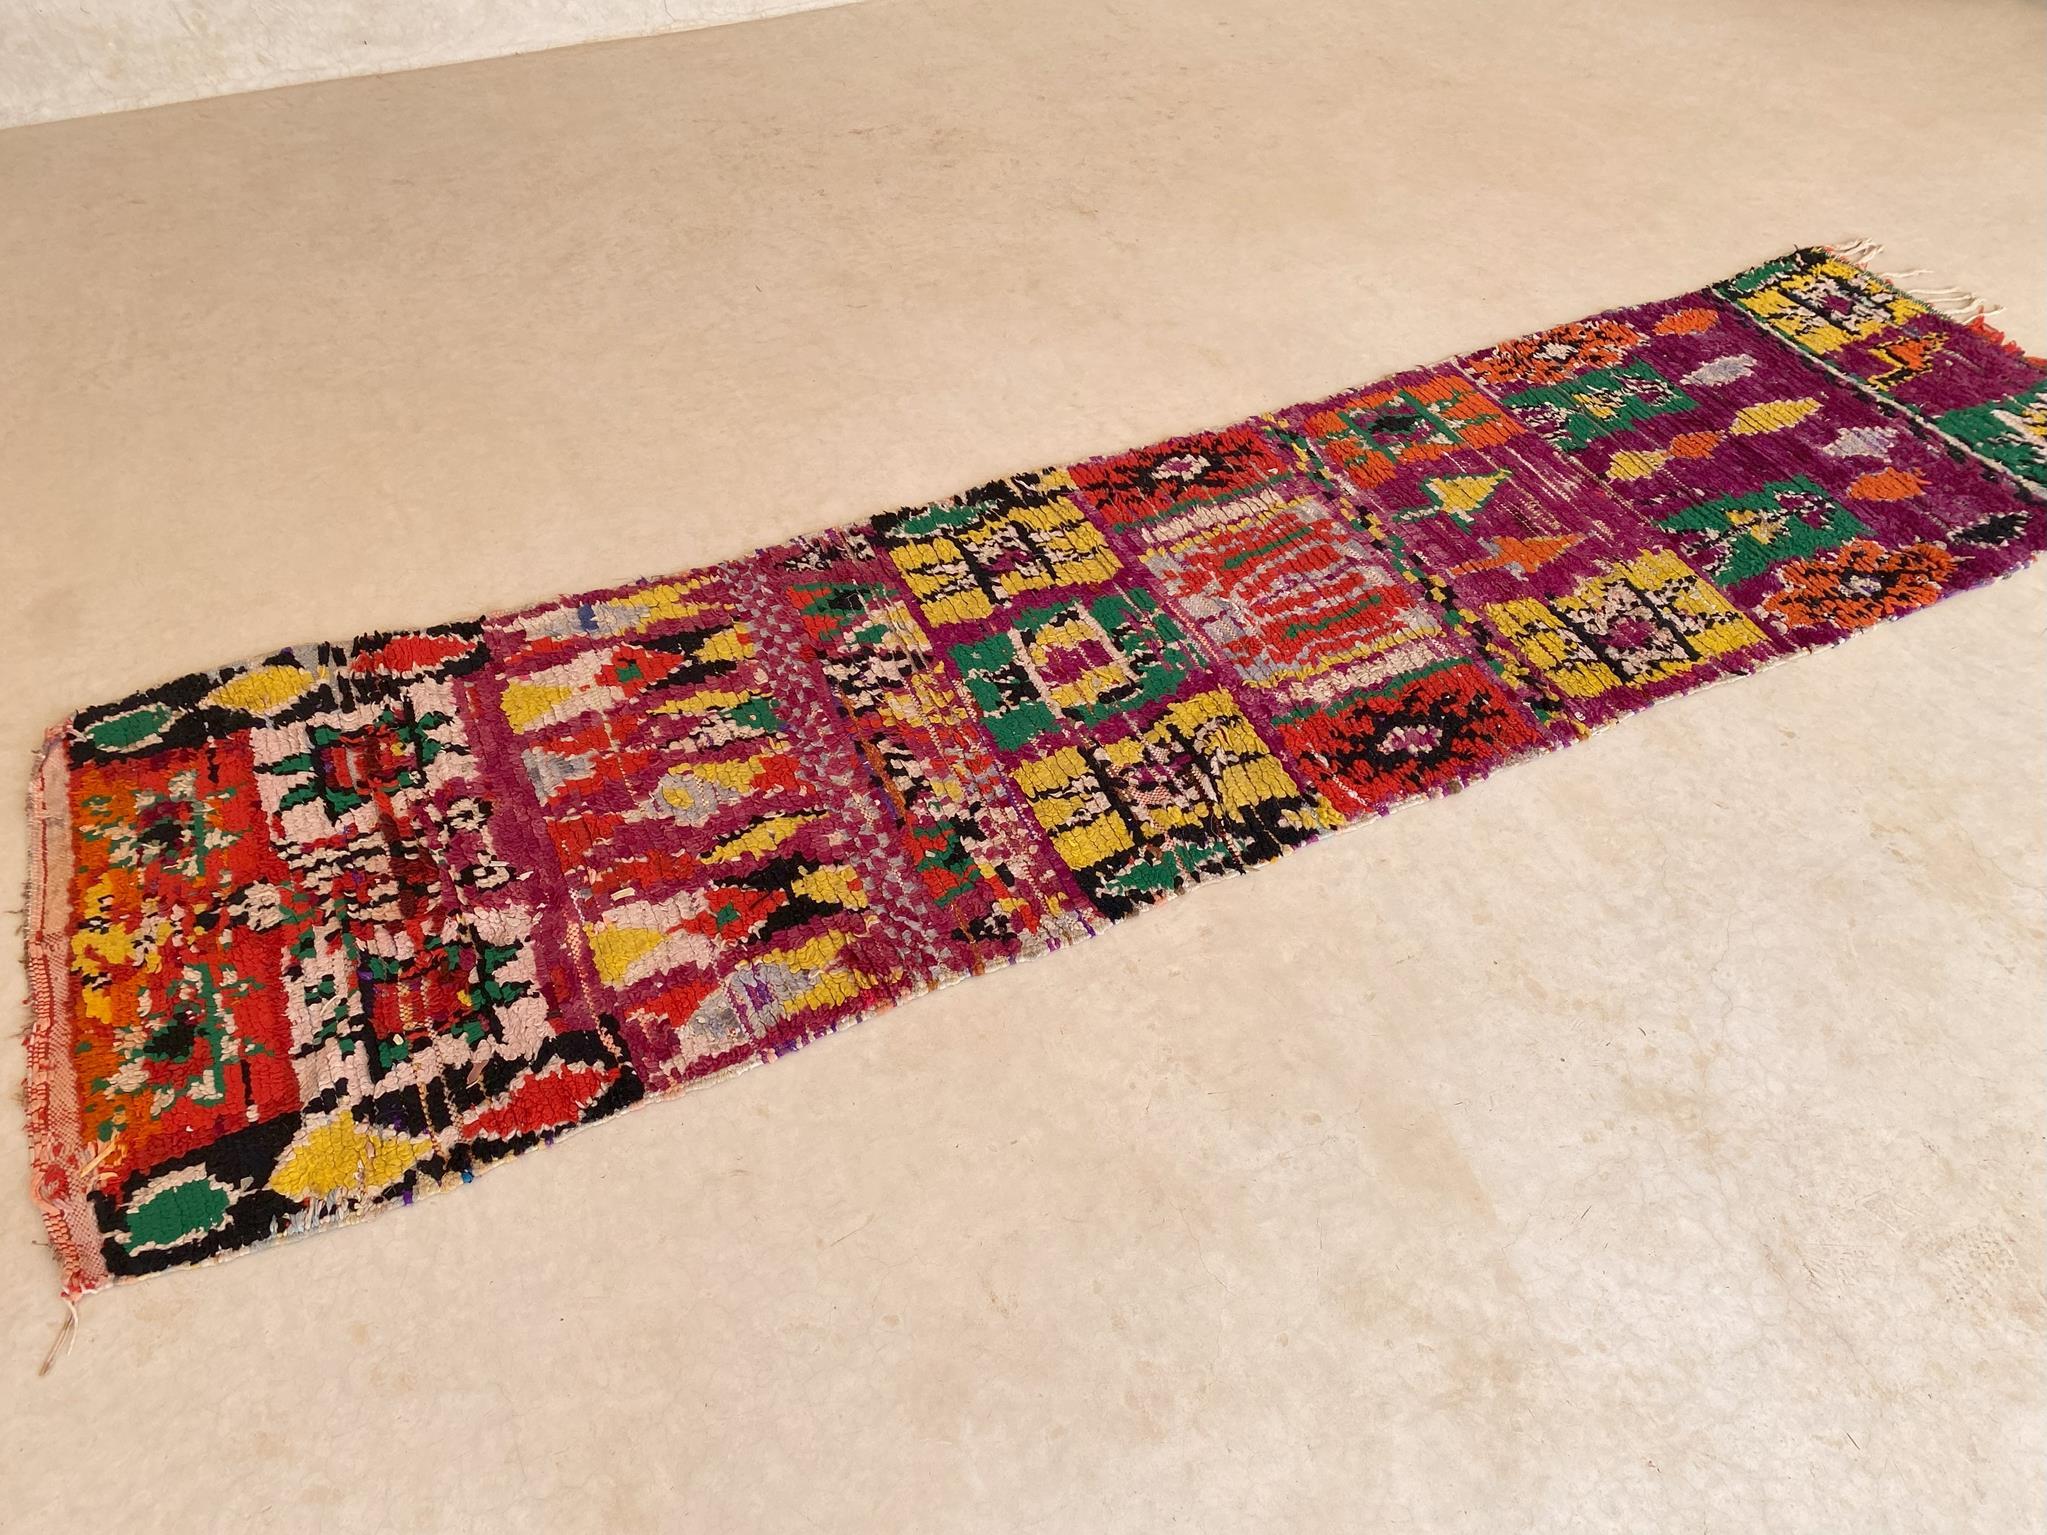 Vintage Moroccan runner rug - Purple/green/orange - 2.8x11.5feet / 87x352cm In Fair Condition For Sale In Marrakech, MA